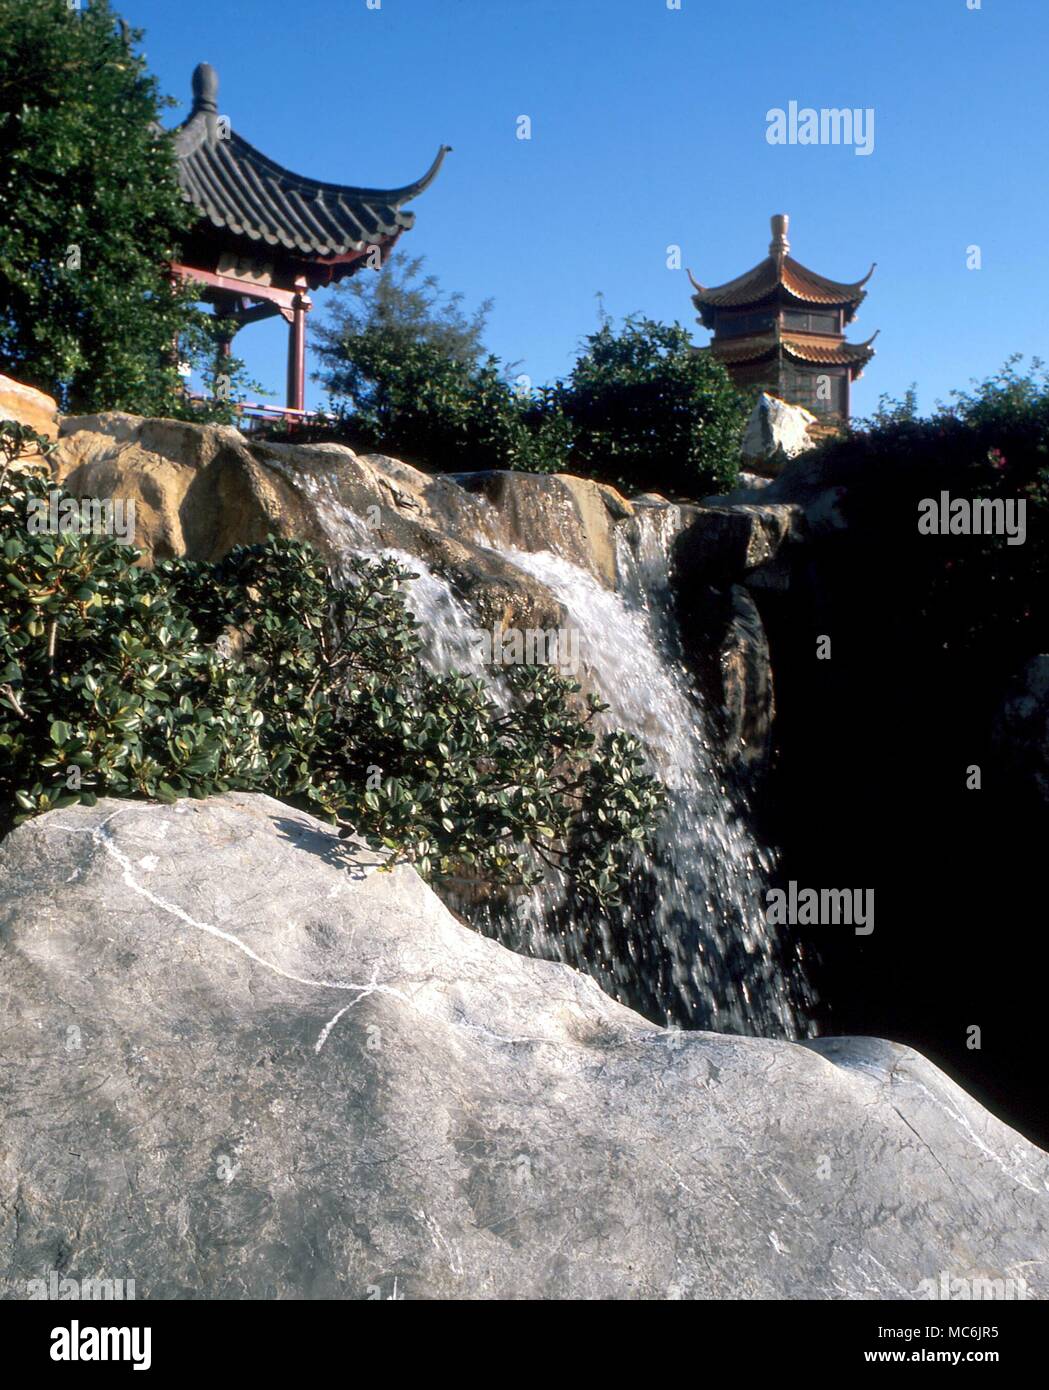 FENG SHUI - The Chinese Feng Shui experts unite air (wind and scents) with 'heat' (sun and shade), water and earth currents, to create gardens in which 'a few yards appears to have the space of over a mile'. Chinese garden, Sydney Australia Stock Photo